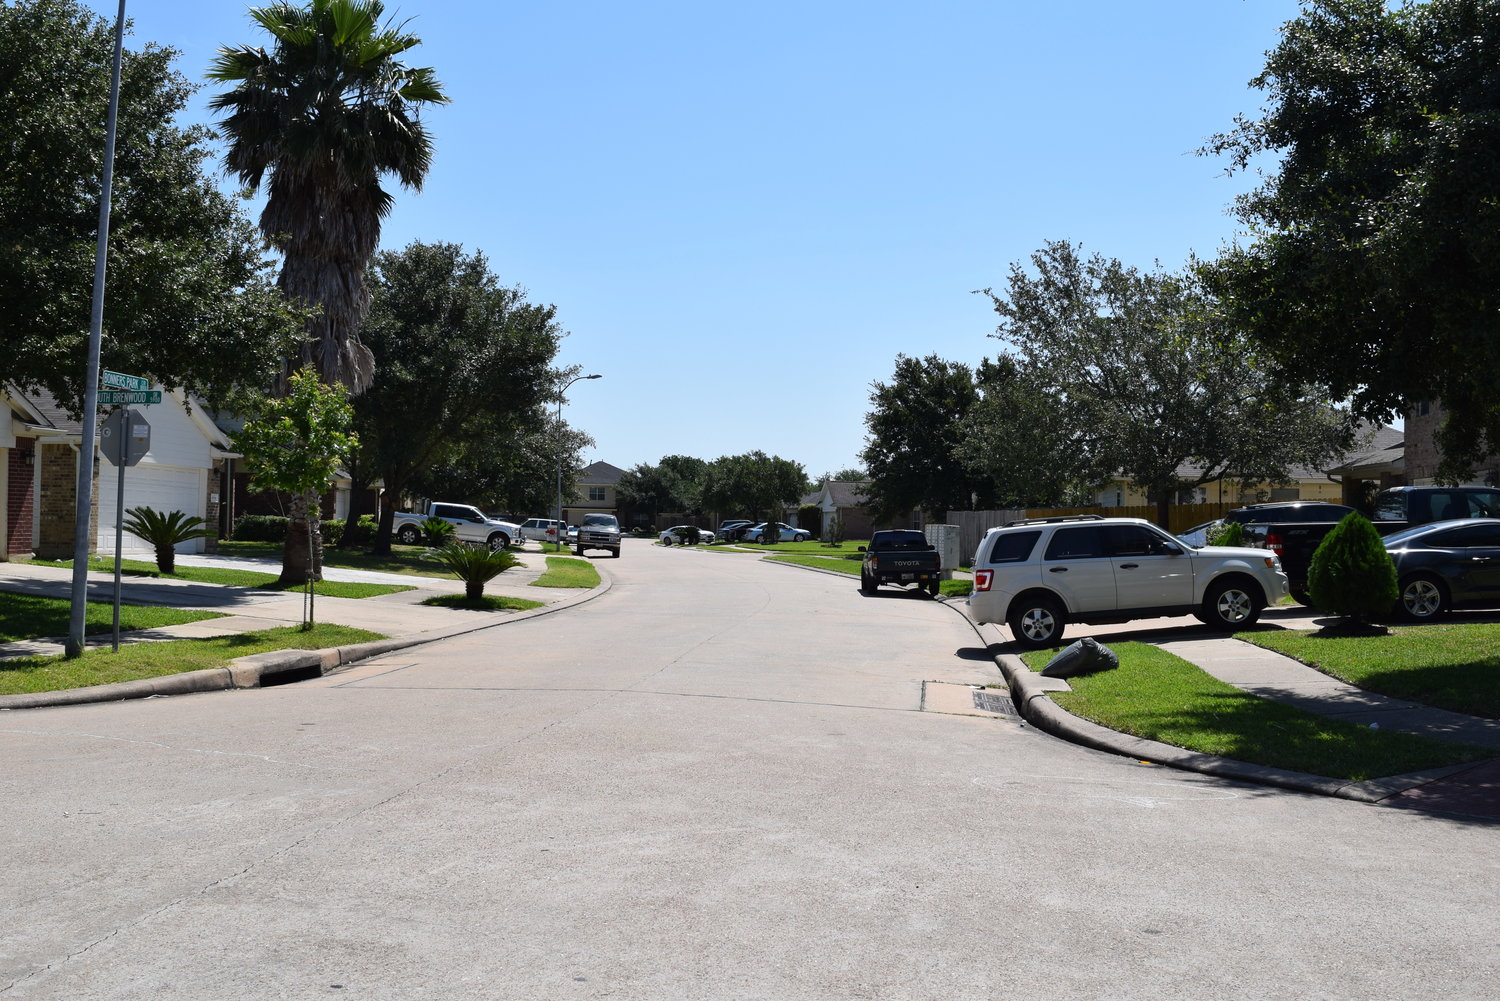 A shooting in at the near end of this middle-class neighborhood in the northeastern portion of the Katy area, near Cypress, occurred shortly after 9 p.m. Mothers Day.